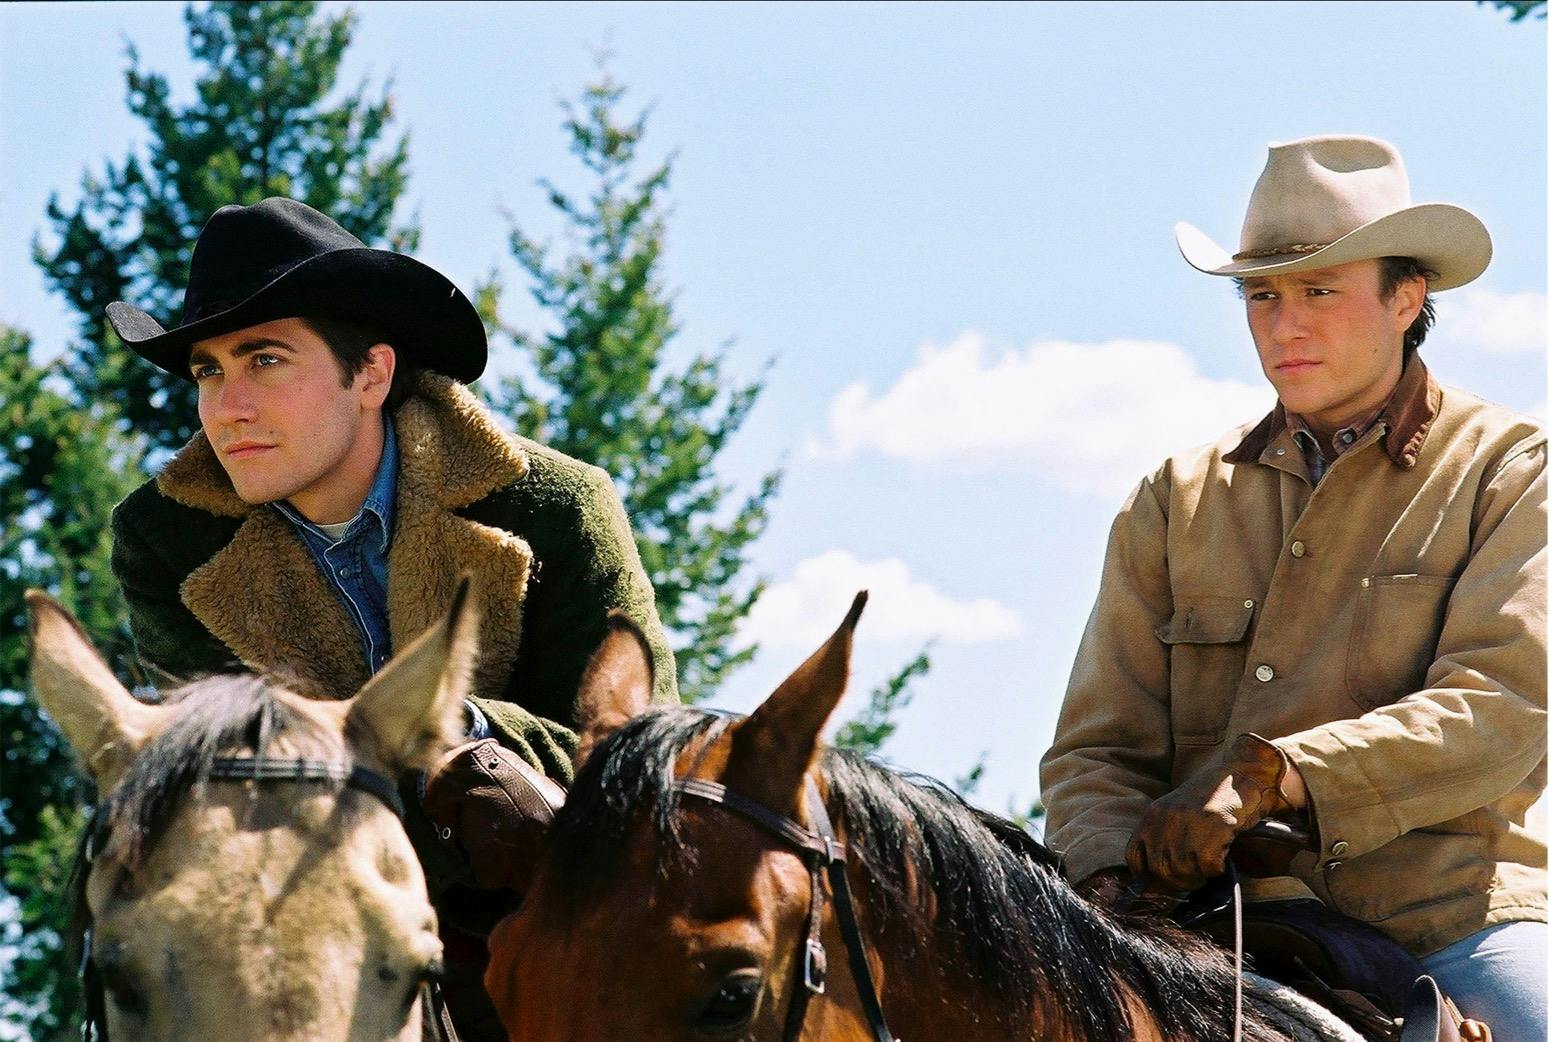 Jack Twist (Jake Gyllenhaal) and Ennis Del Mar (Heath Ledger) in Brokeback Mountain (2005) sit on horses side-by-side. Gyllenhaal wears a fur coat, dark hat, and the most epic denim shirt in all of film history. Ledger wears a tan jacket and tan hat. The sky is blue and there are green trees in the background.